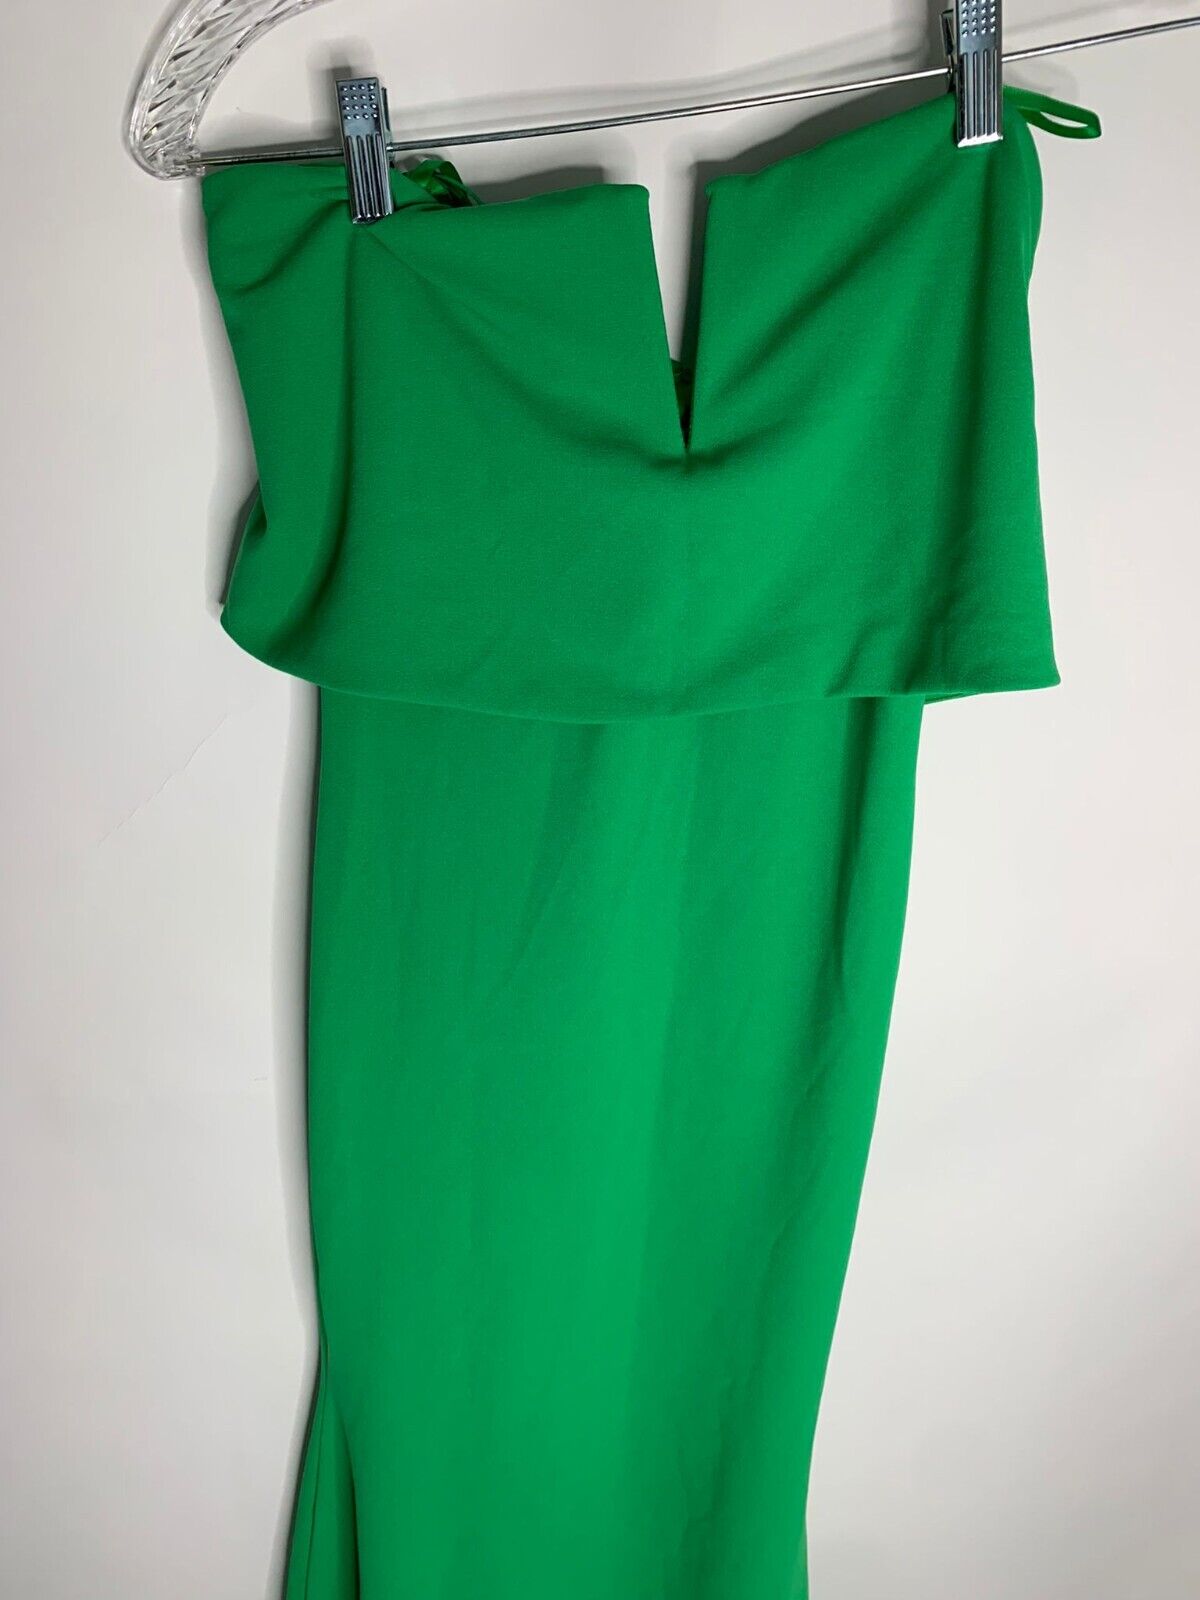 Akira Chicago Black Label Womens S Green Another Day Strapless Maxi Dress Gown